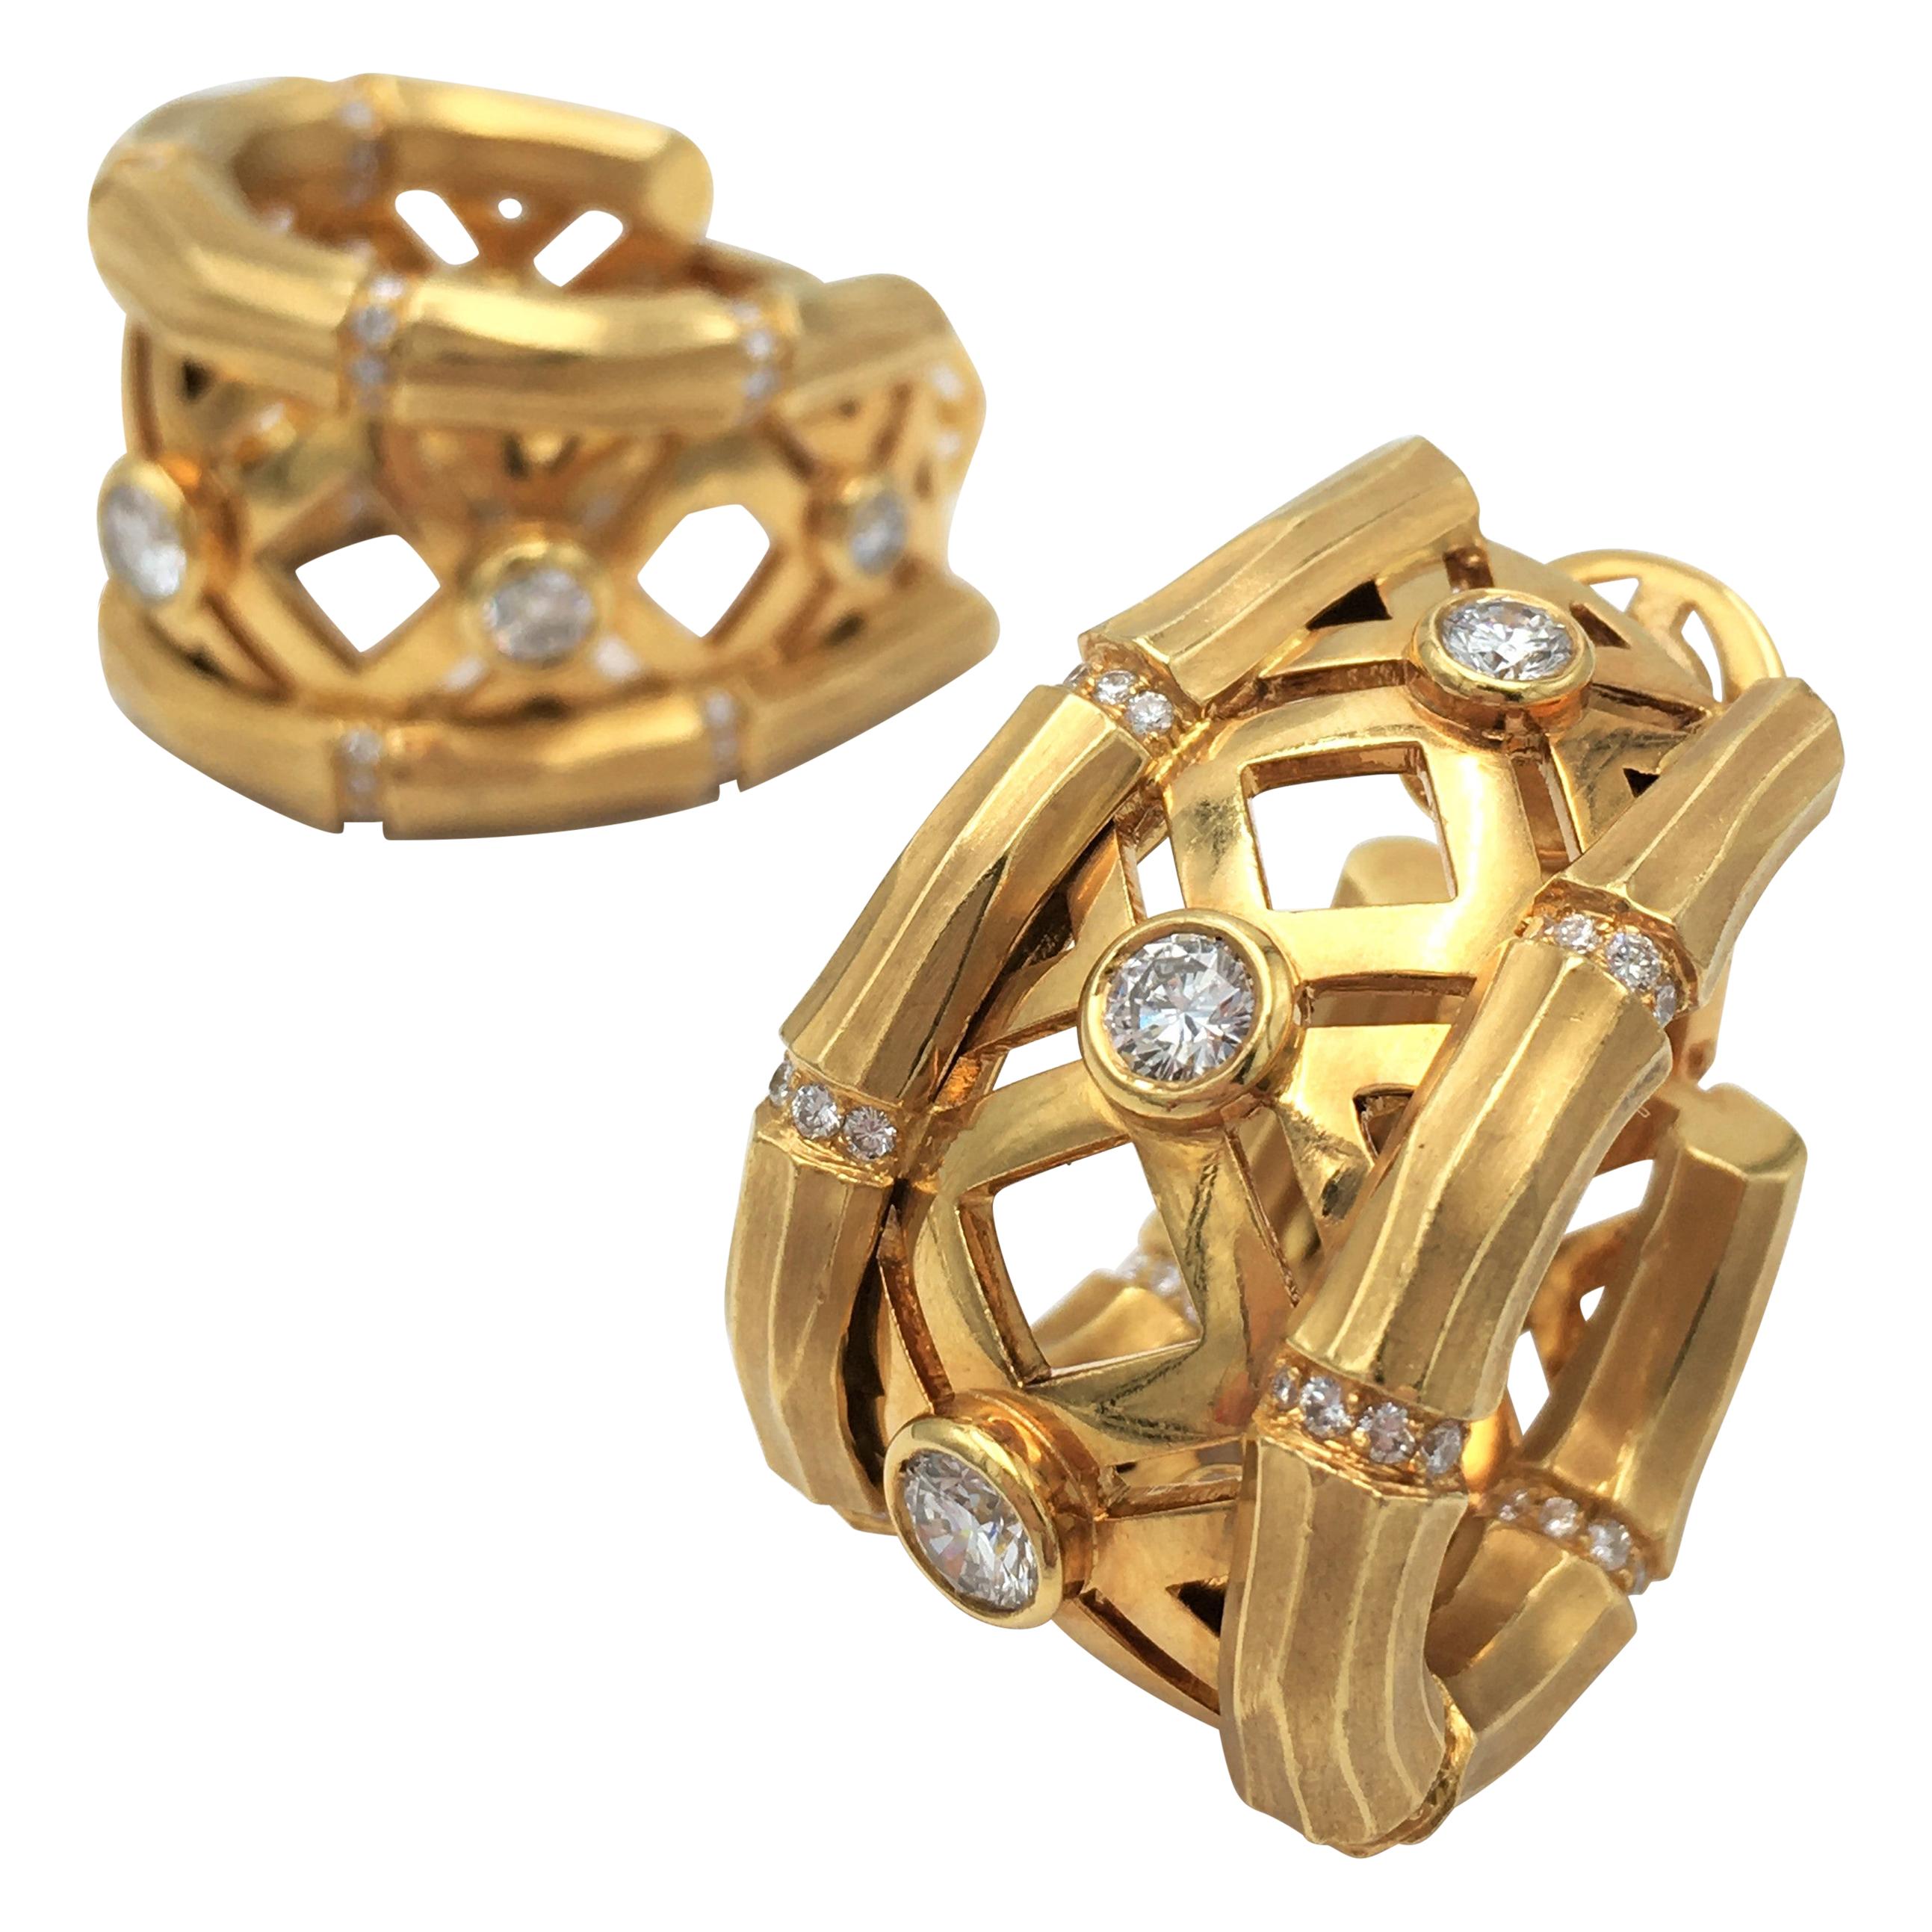 Cartier 'Bamboo' Yellow Gold and Diamond Earrings